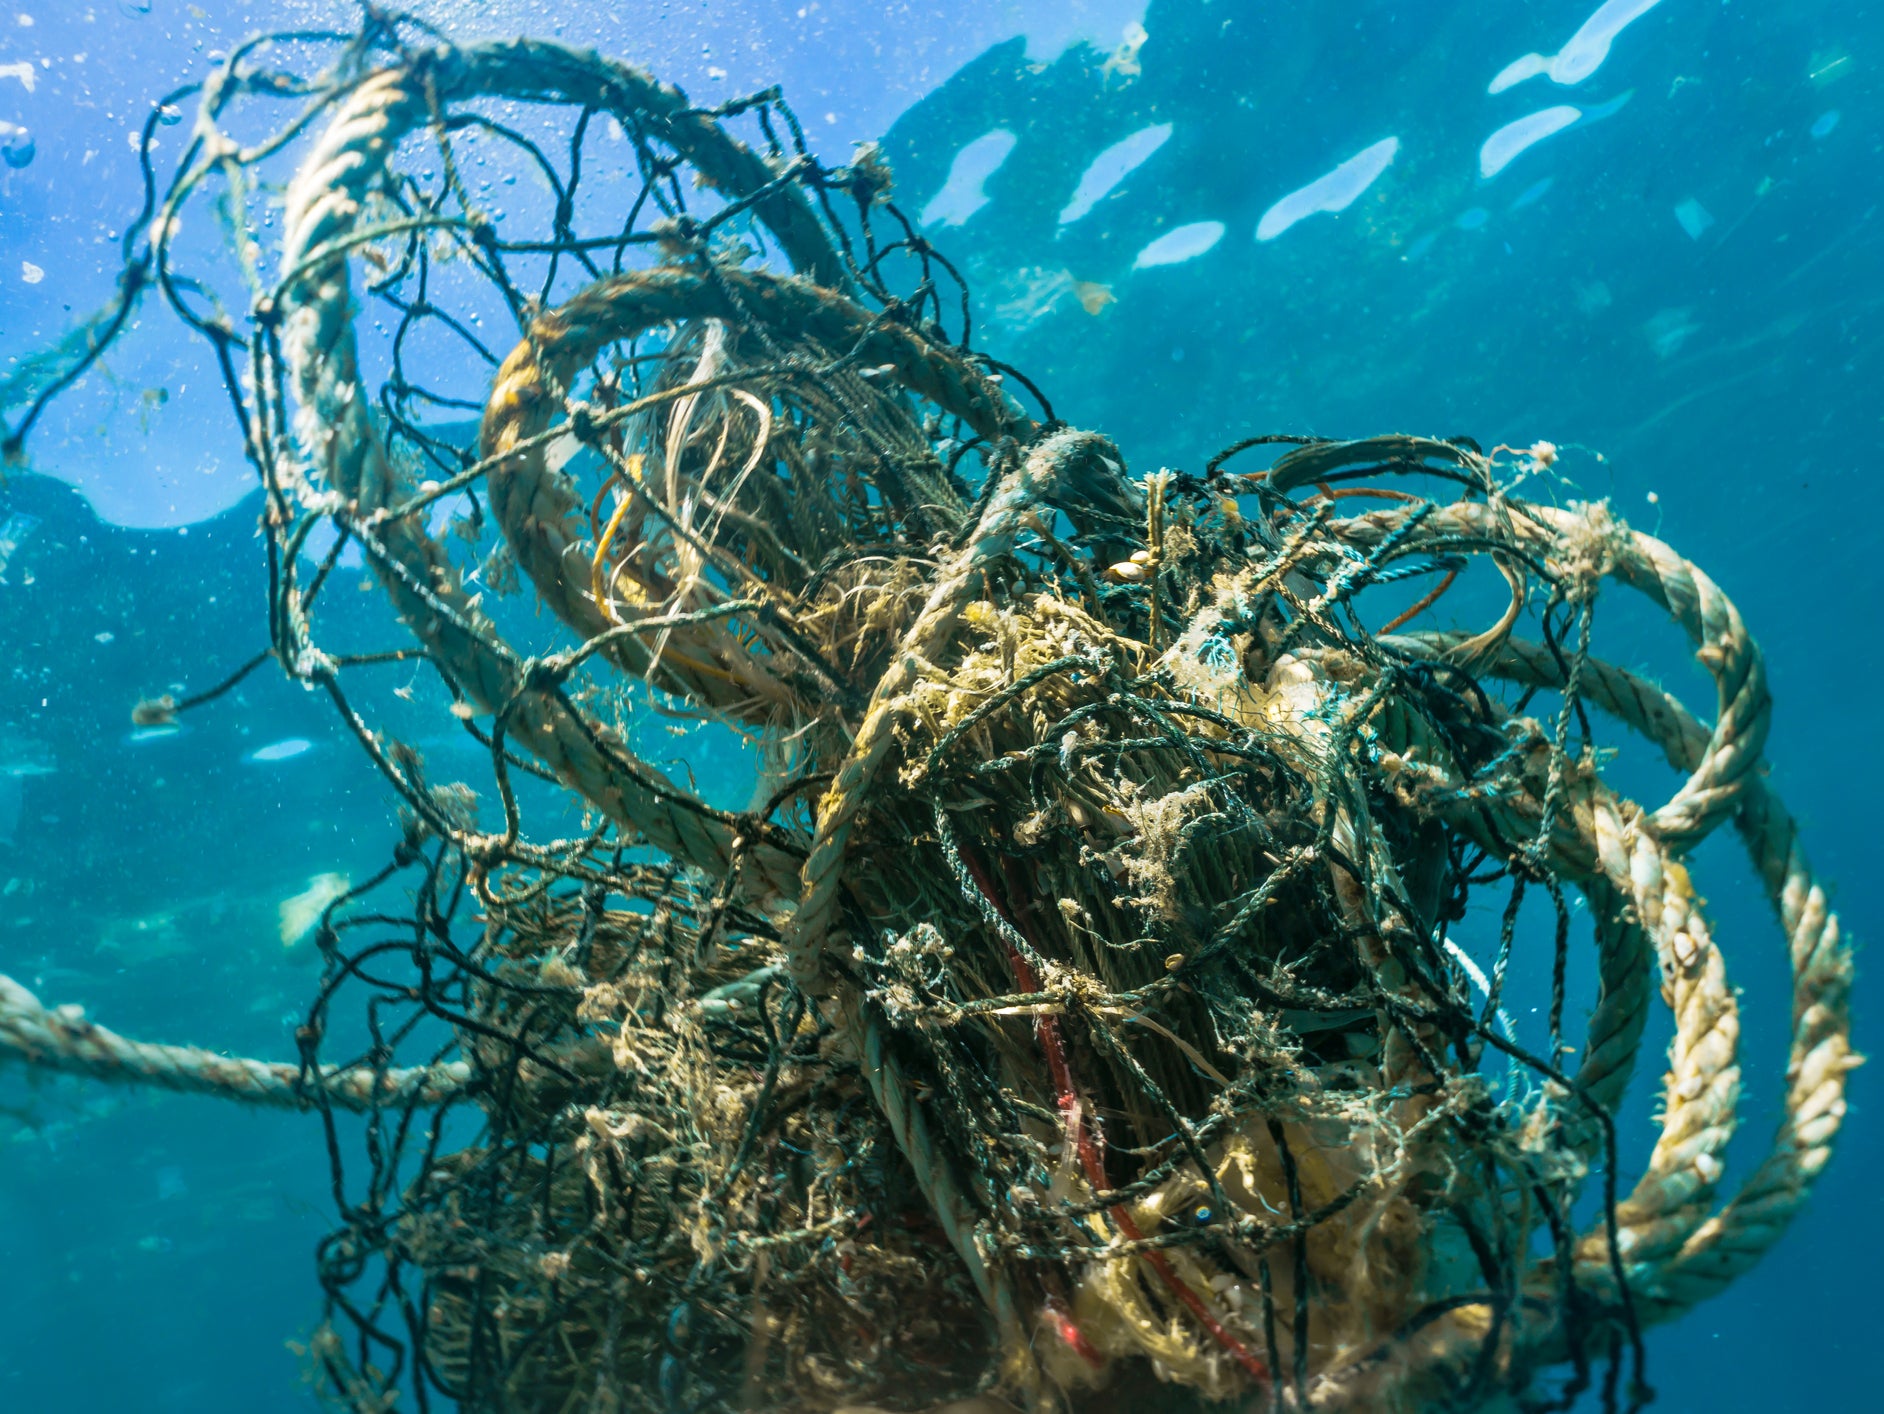 Lost, abandoned or broken nets, lines and ropes make up at least 10 per cent of marine litter, according to a new report